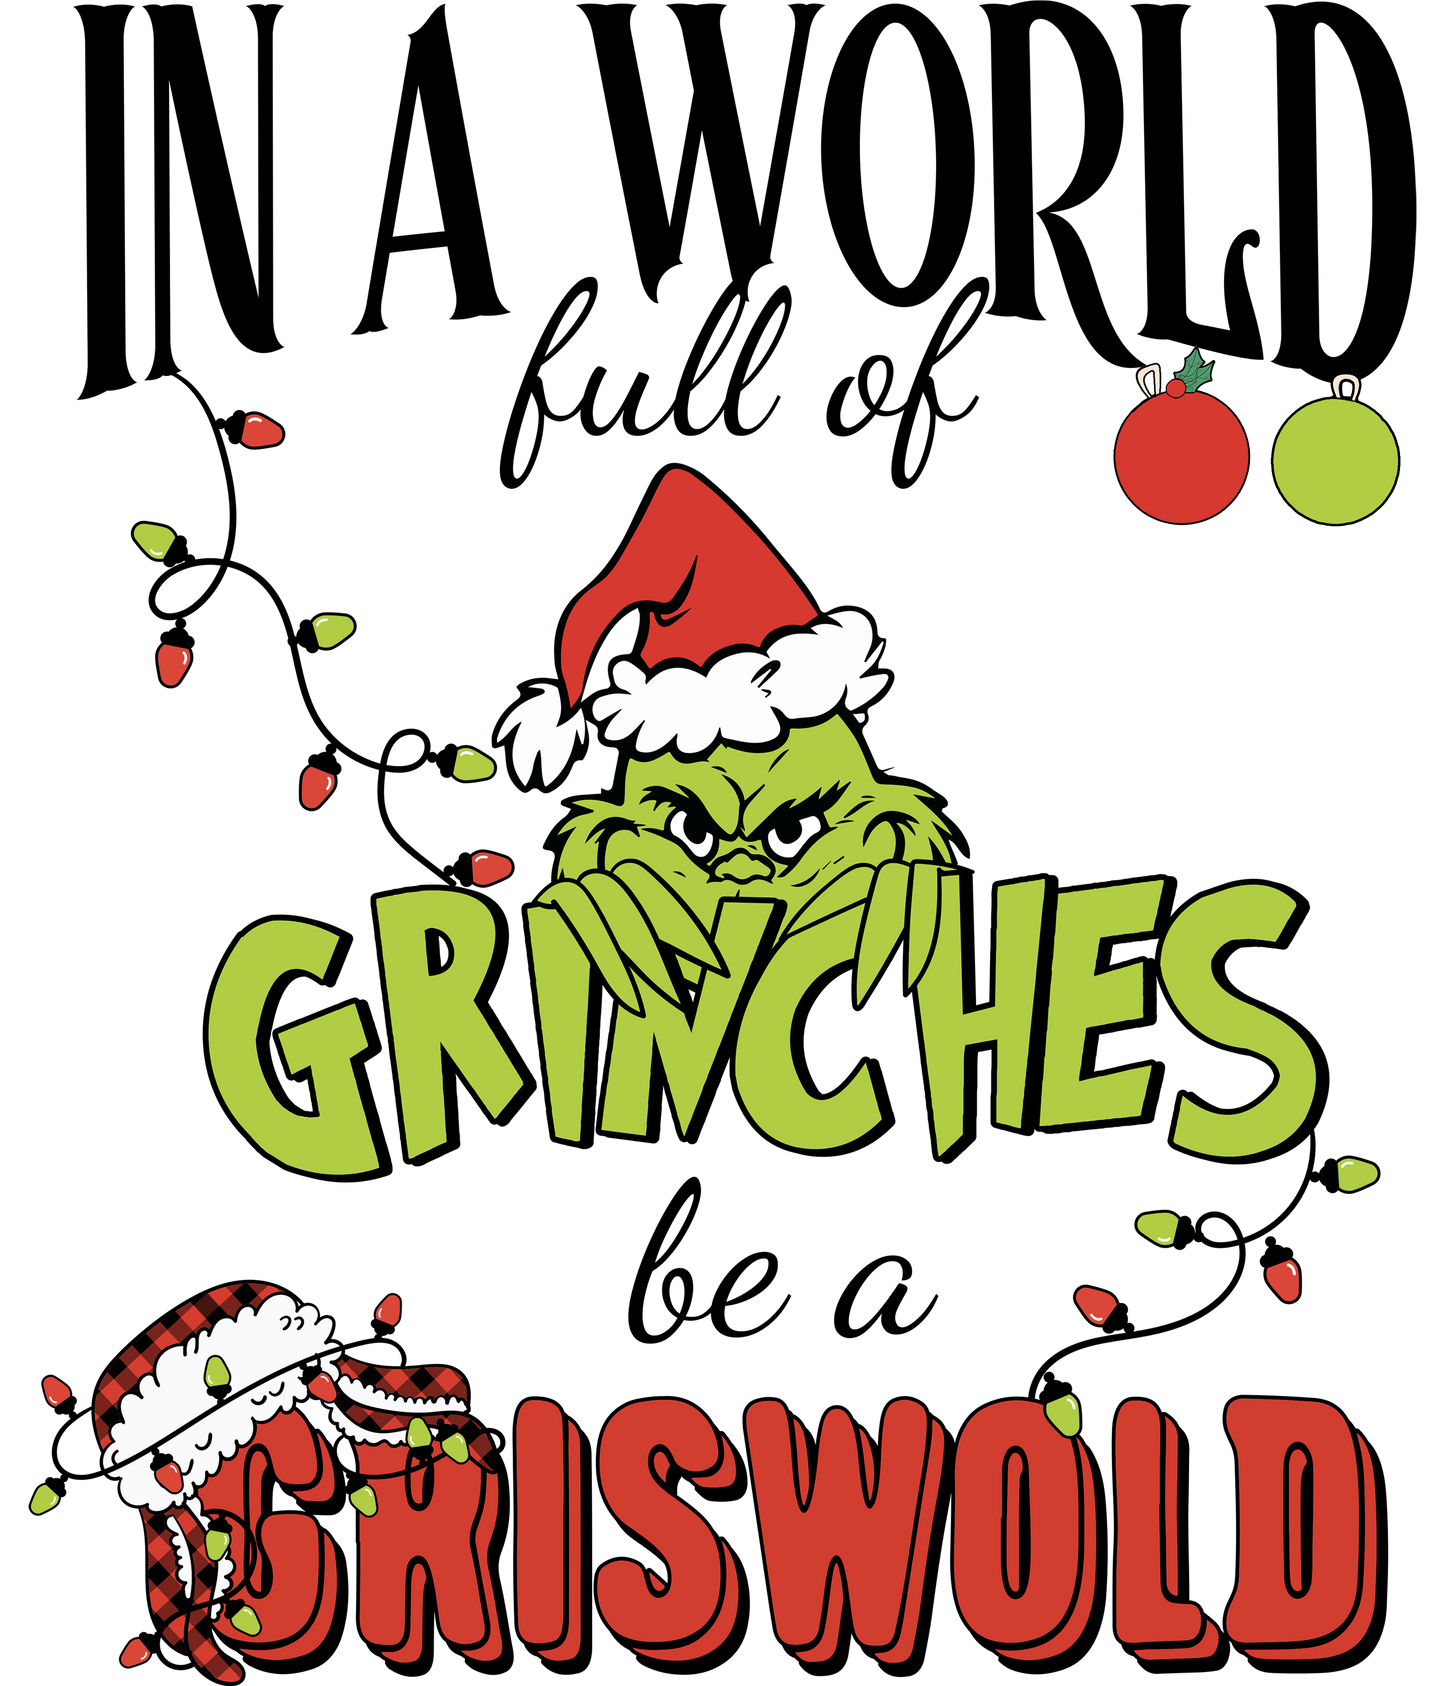 In a World full of Grinches be a Griswold